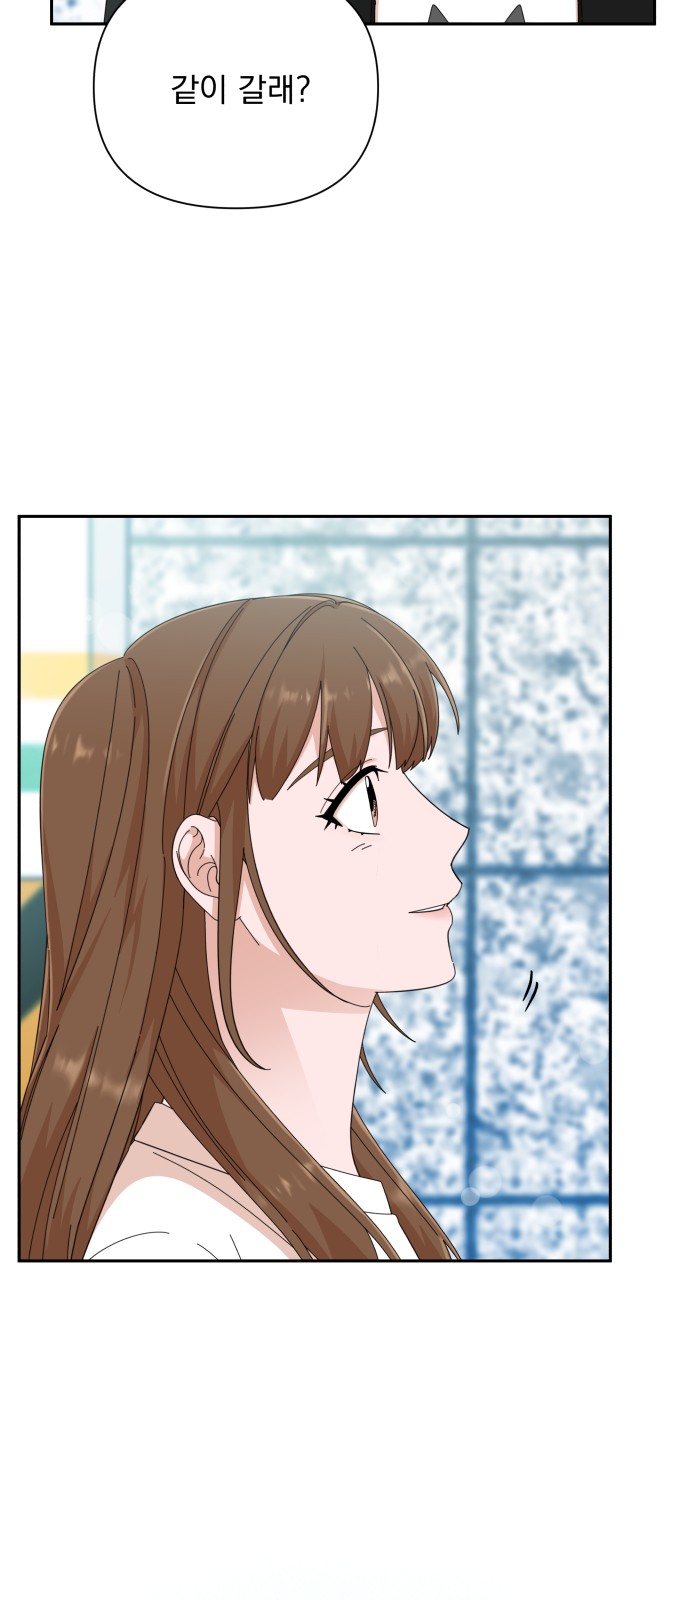 The Man With Pretty Lips - Chapter 39 - Page 2